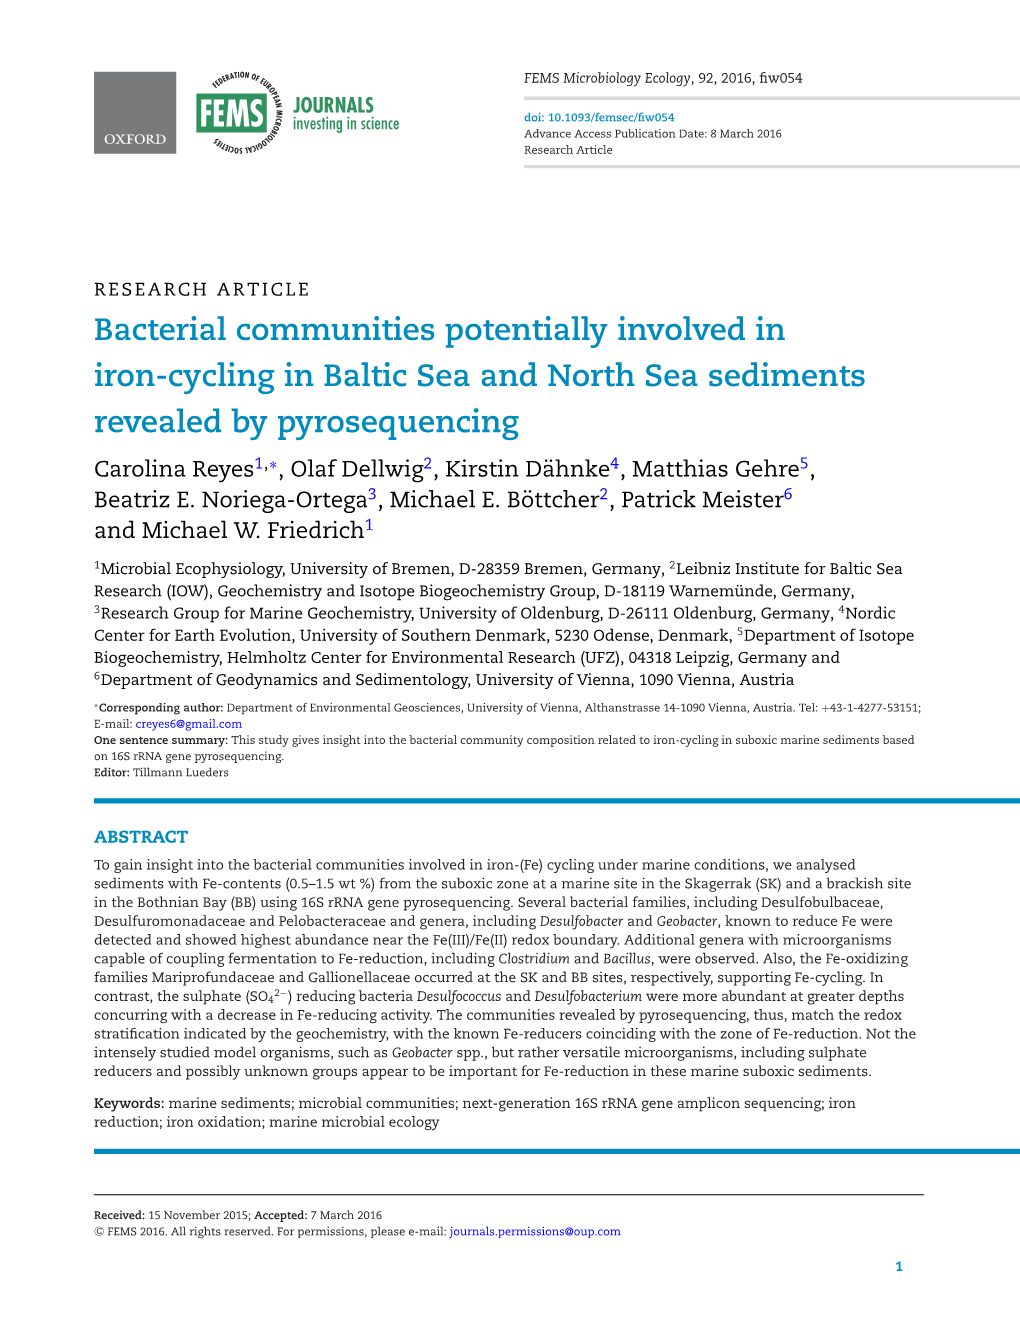 Bacterial Communities Potentially Involved in Iron-Cycling in Baltic Sea and North Sea Sediments Revealed by Pyrosequencing